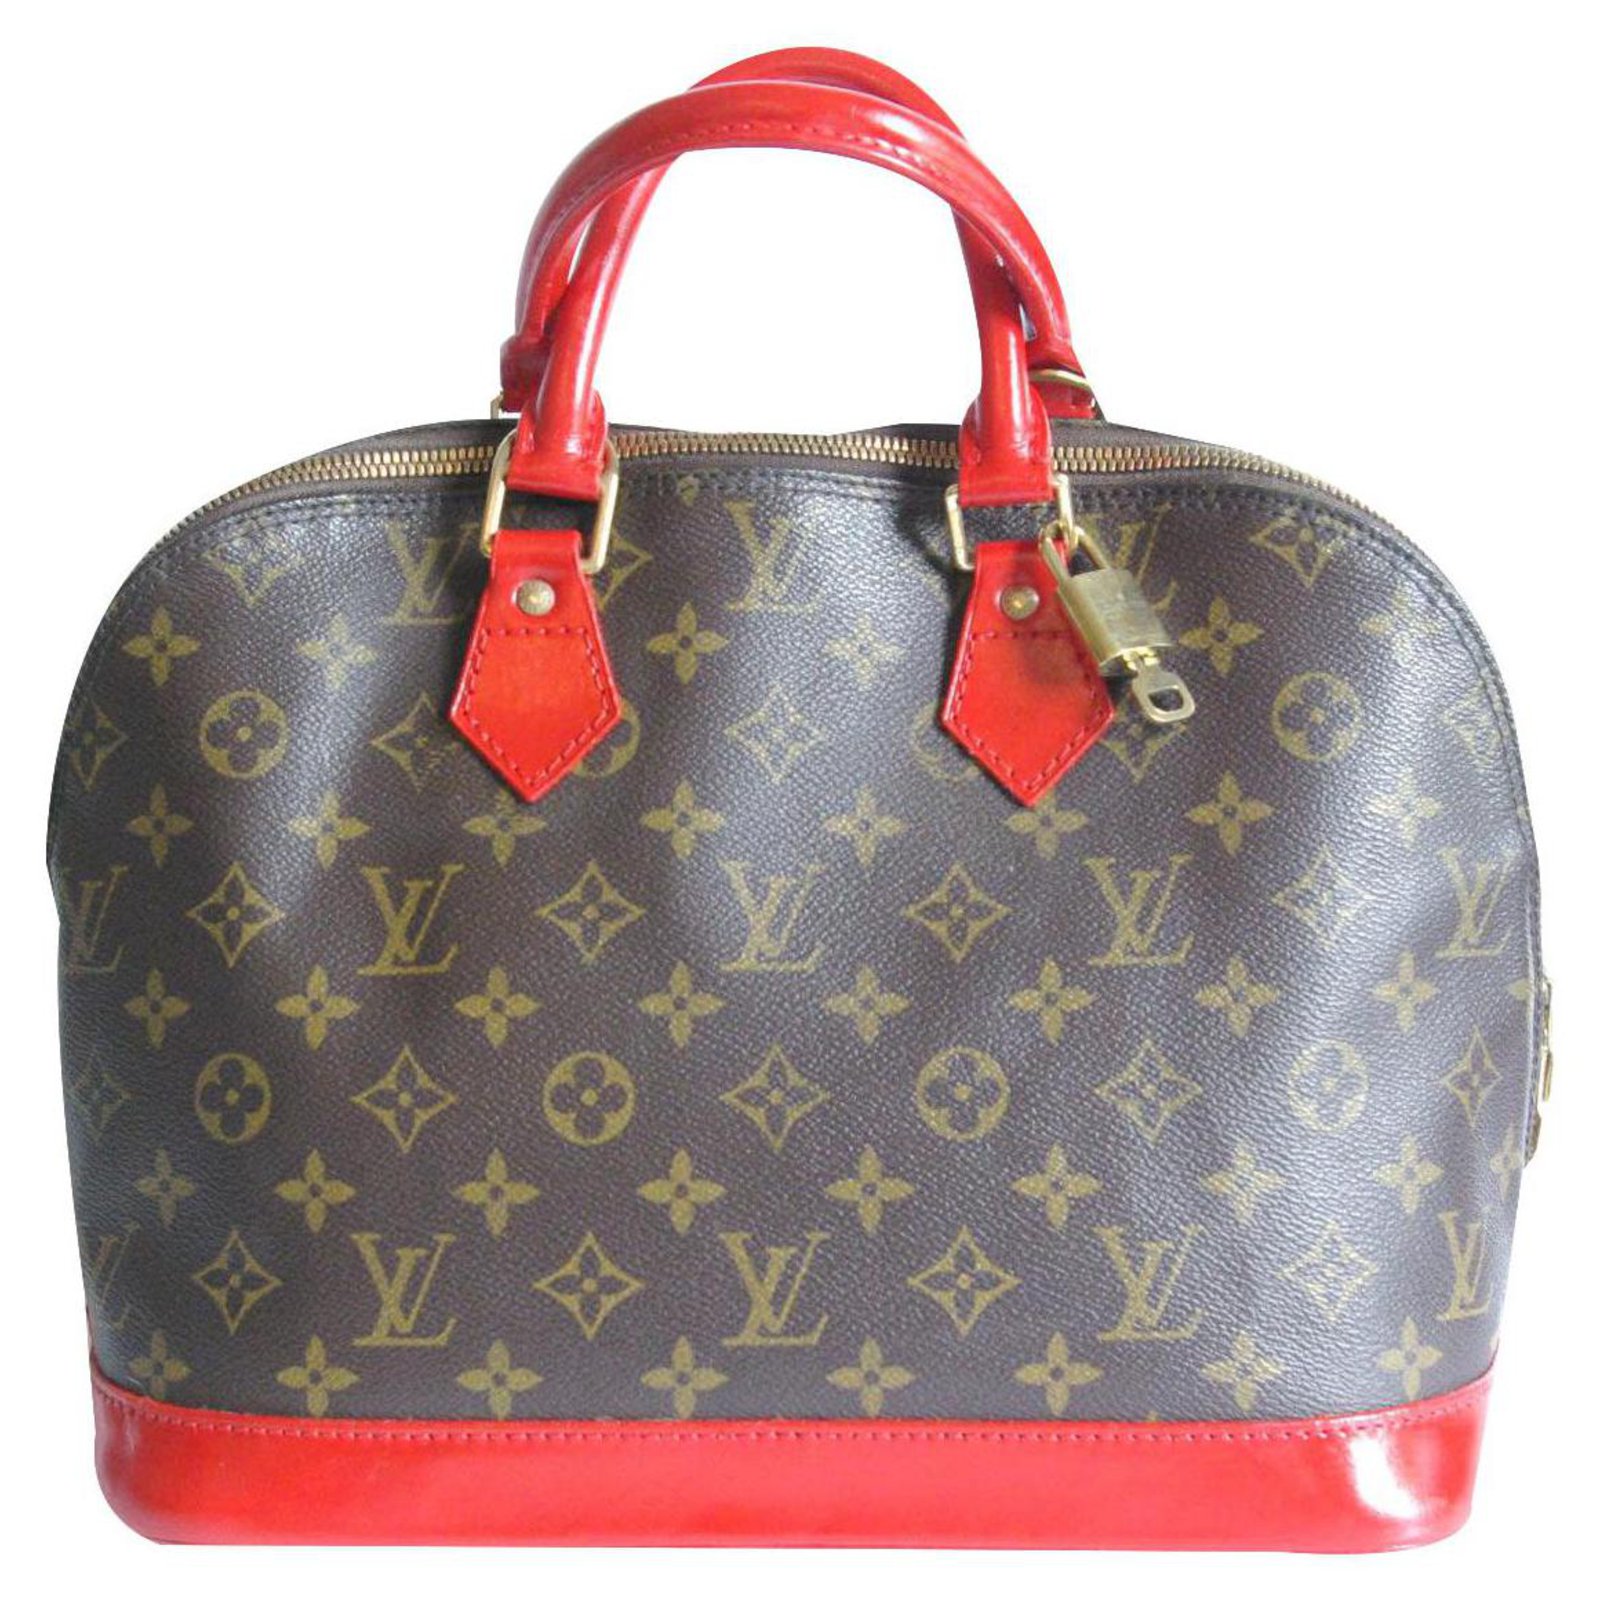 Louis+Vuitton+Alma+Fabric+Interior+Shoulder+Bag+PM+Red+Leather for